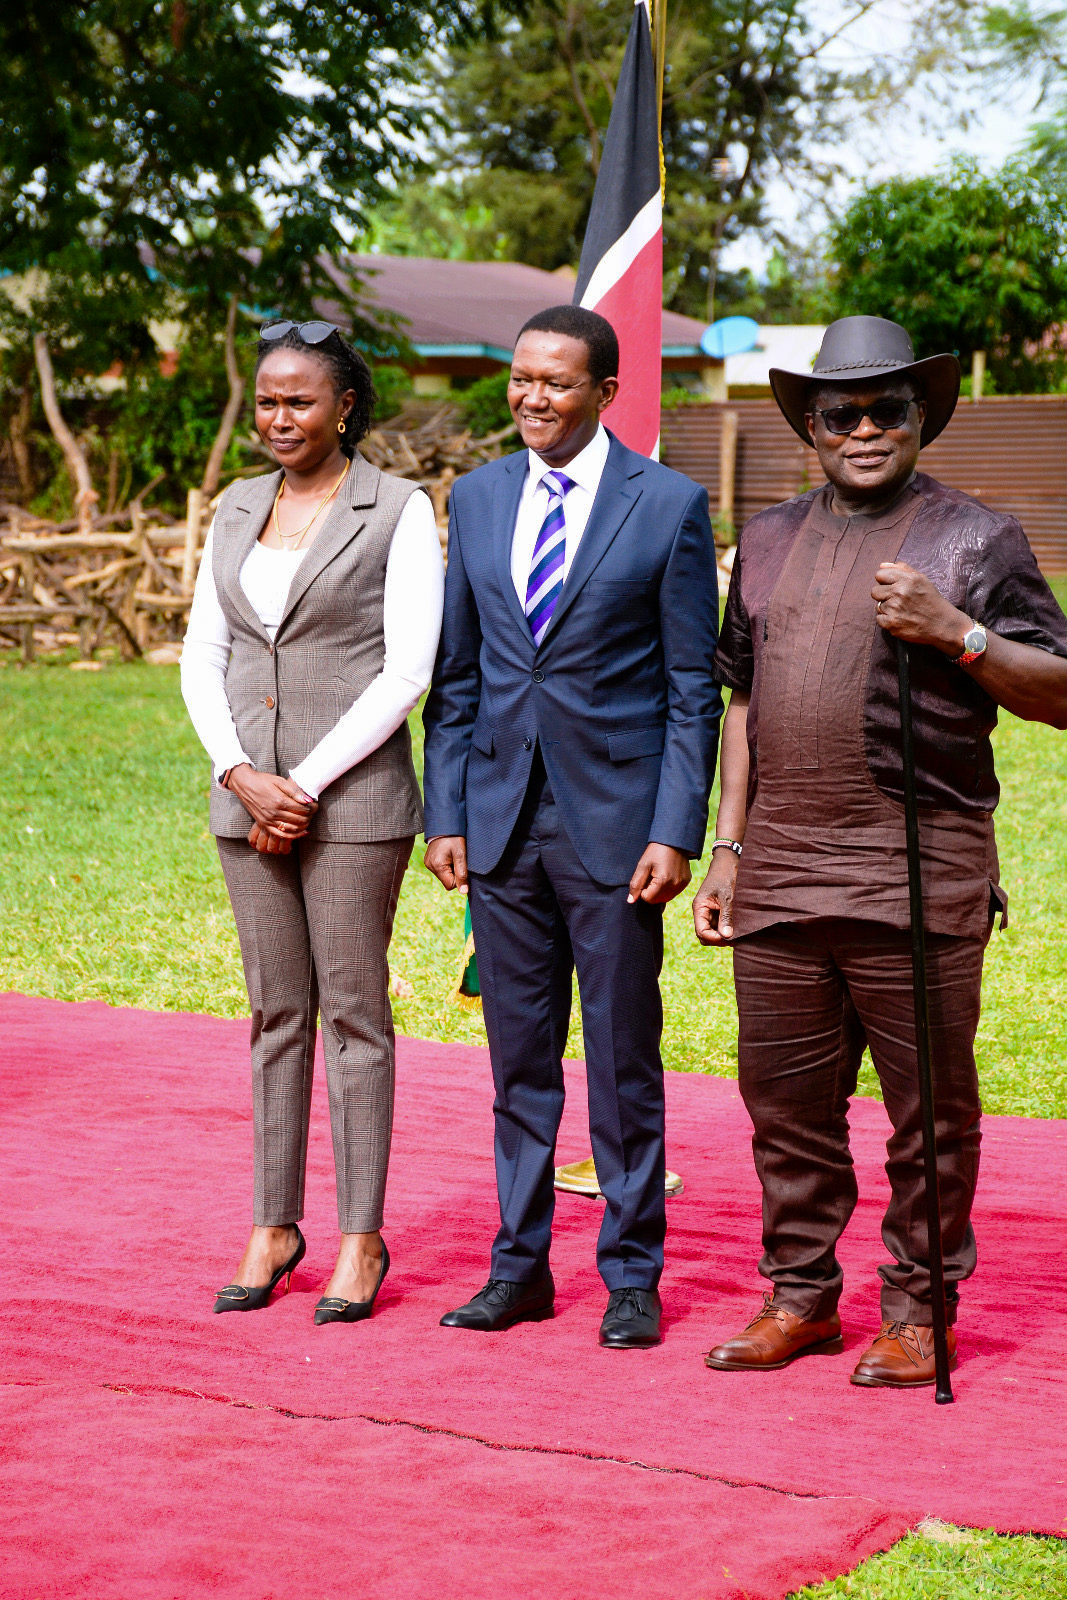 The Principal Secretary, State Department for Wildlife, Ms. Silvia Museiya (left); the Cabinet Secretary, Ministry of Tourism and Wildlife, Dr. Alfred Mutua (centre), and the Governor of Bungoma County, H.E. Rt. Hon. Kenneth Lusaka (right), pose for a photo during the press briefing.